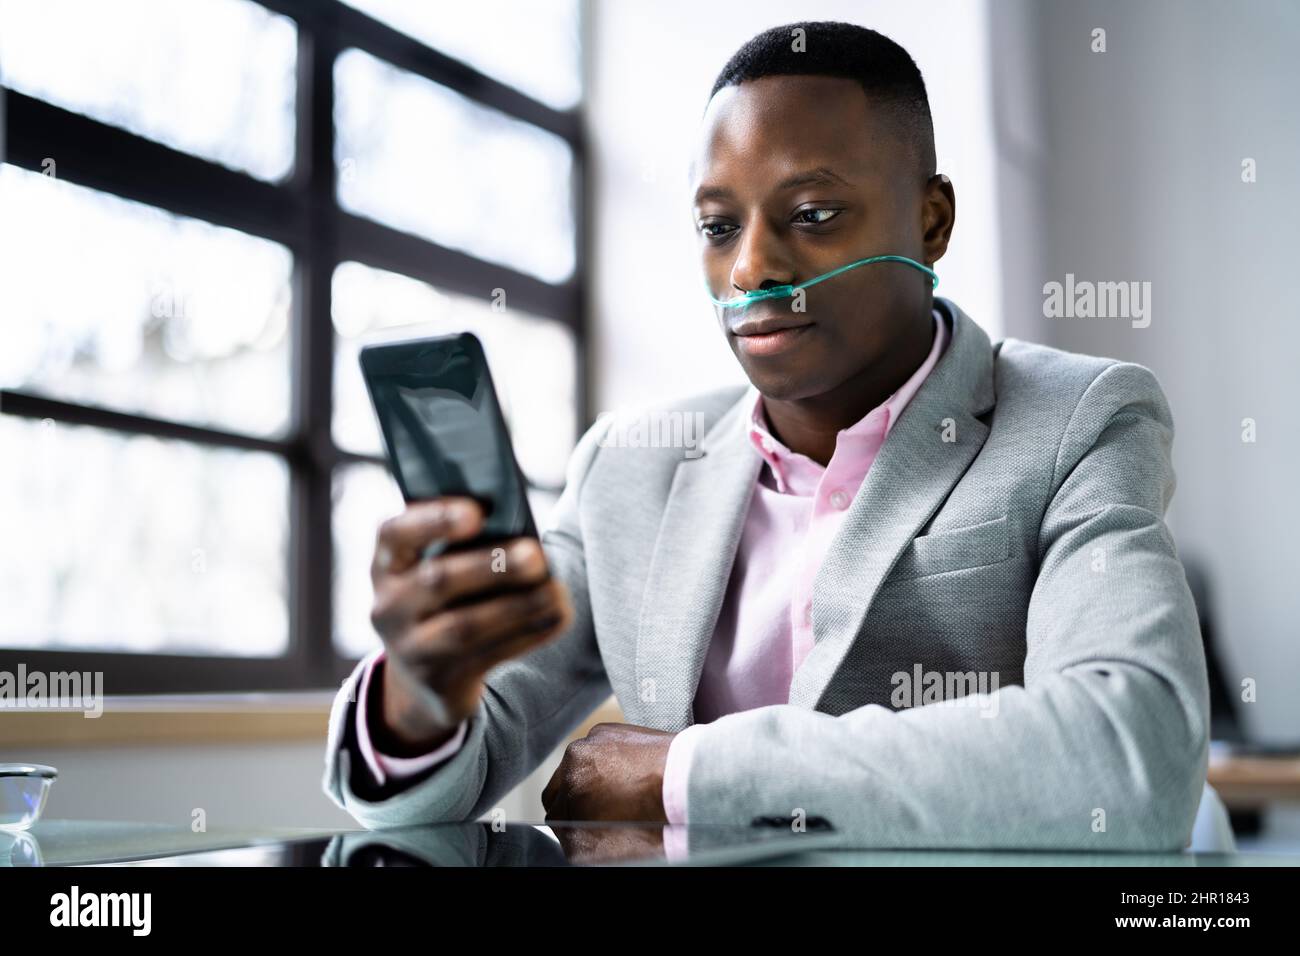 African Man Using Phone With Nasal Oxygen Cannula. Medical Condition Stock Photo